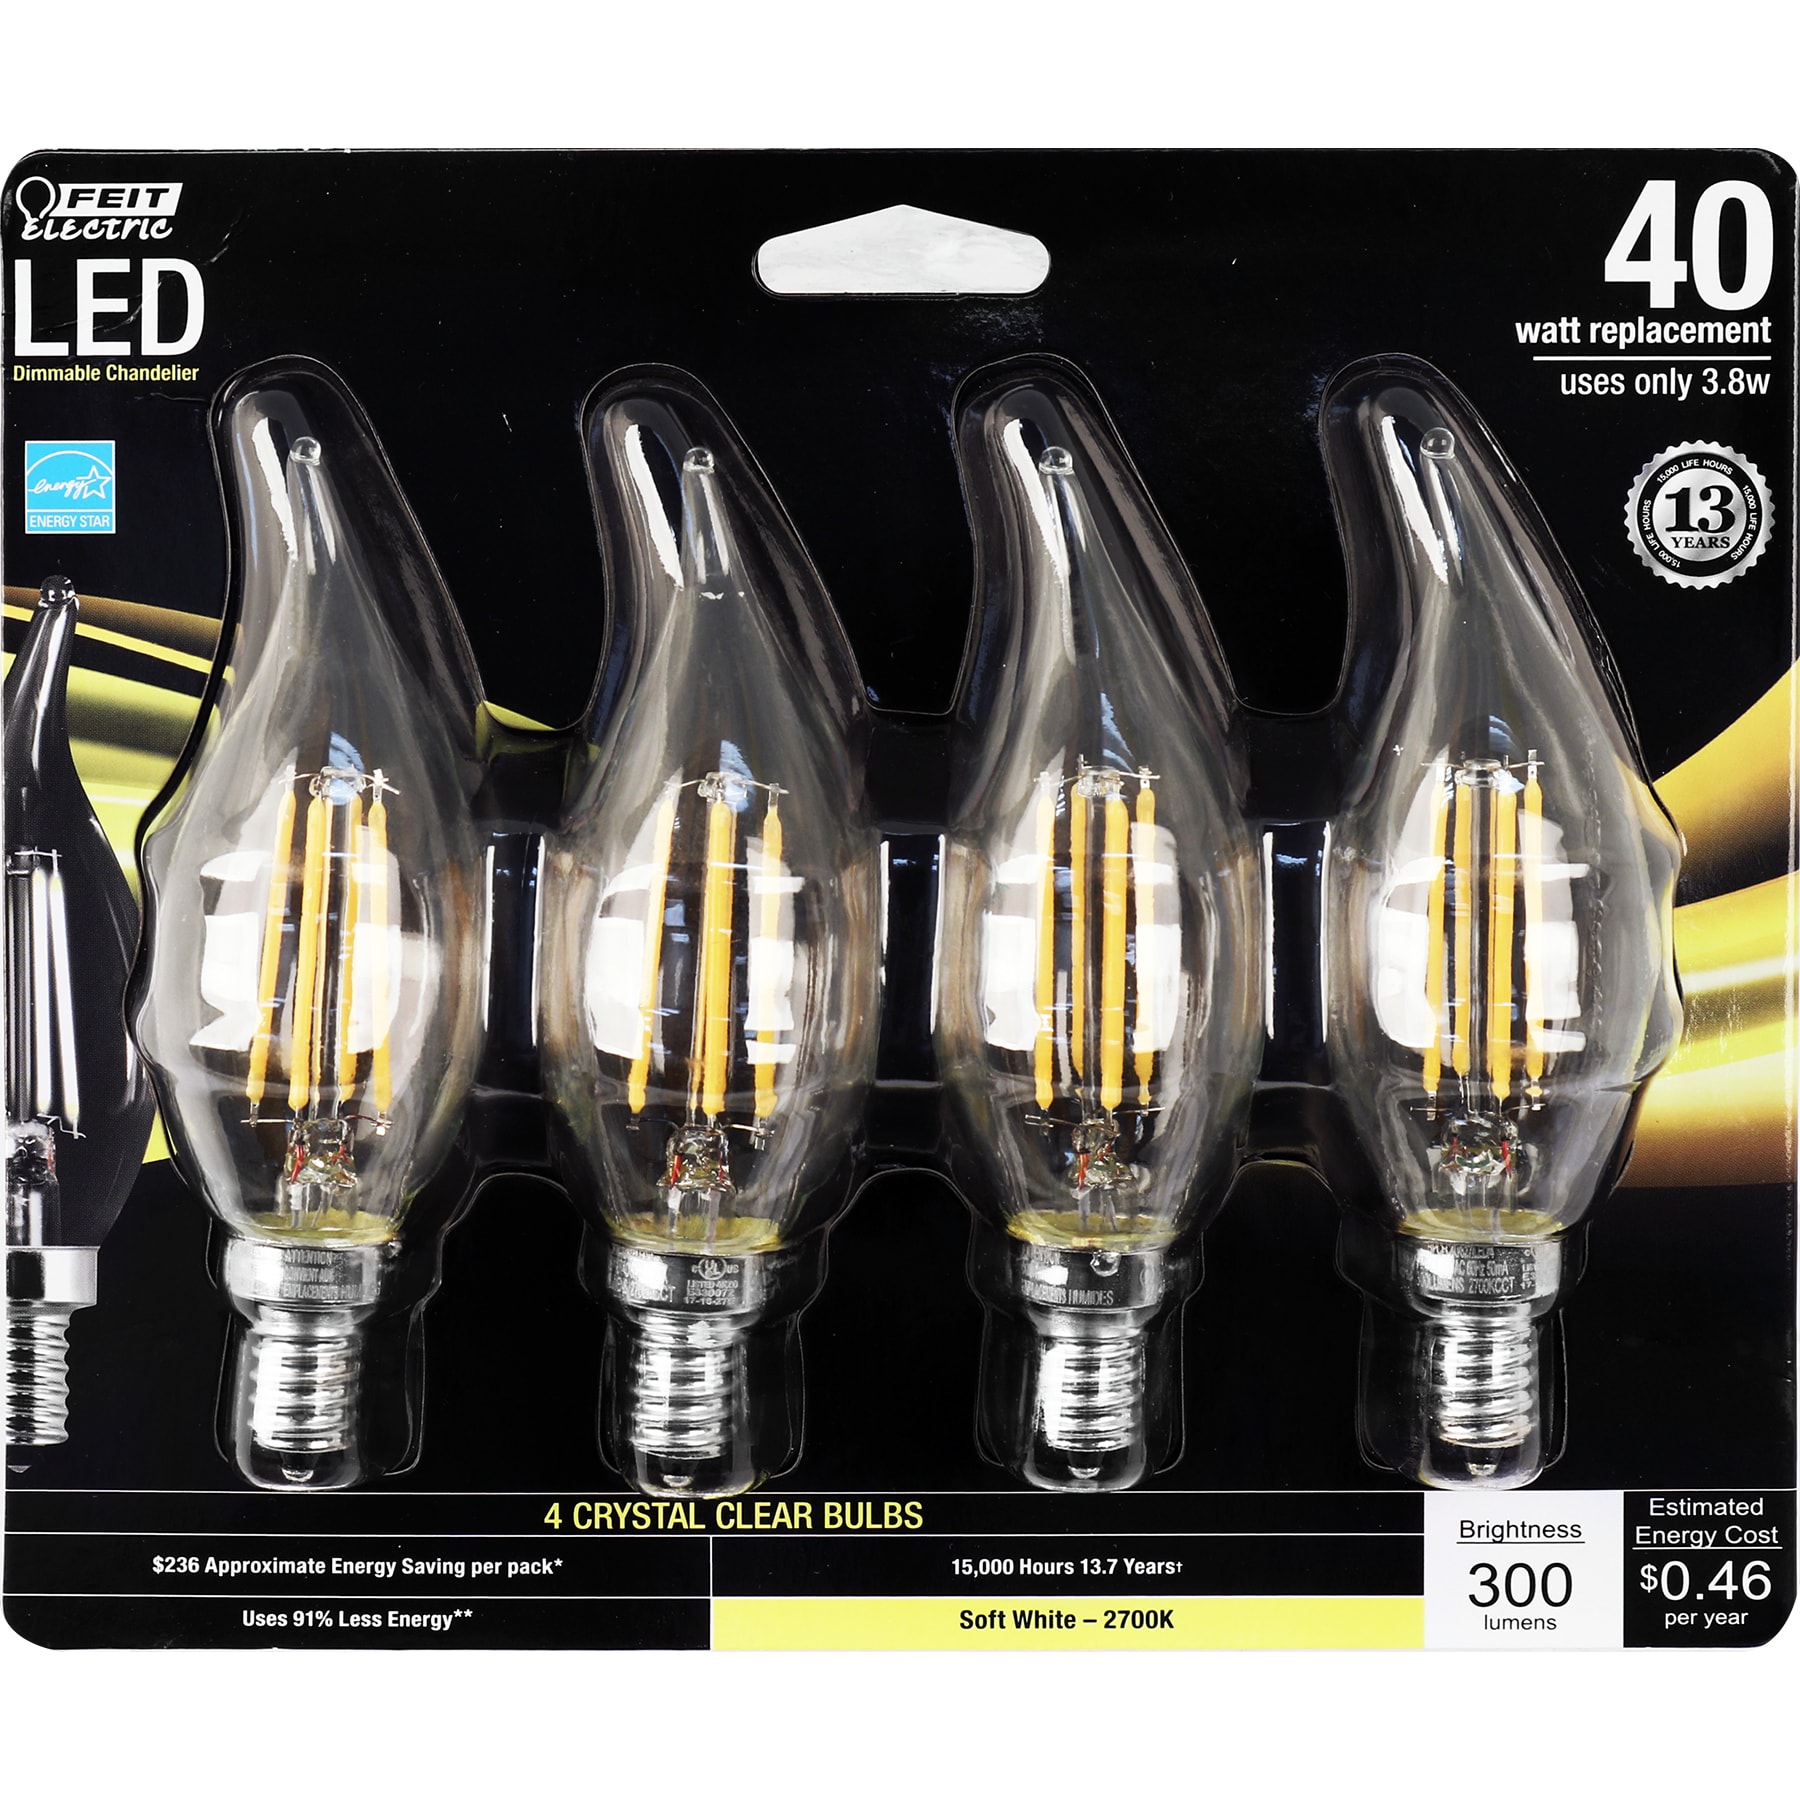 Feit Electric 40-Watt EQ Soft (4-Pack) Bulbs LED Light department the Dimmable (E-12) Light Candelabra Decorative in at Bulb White Base